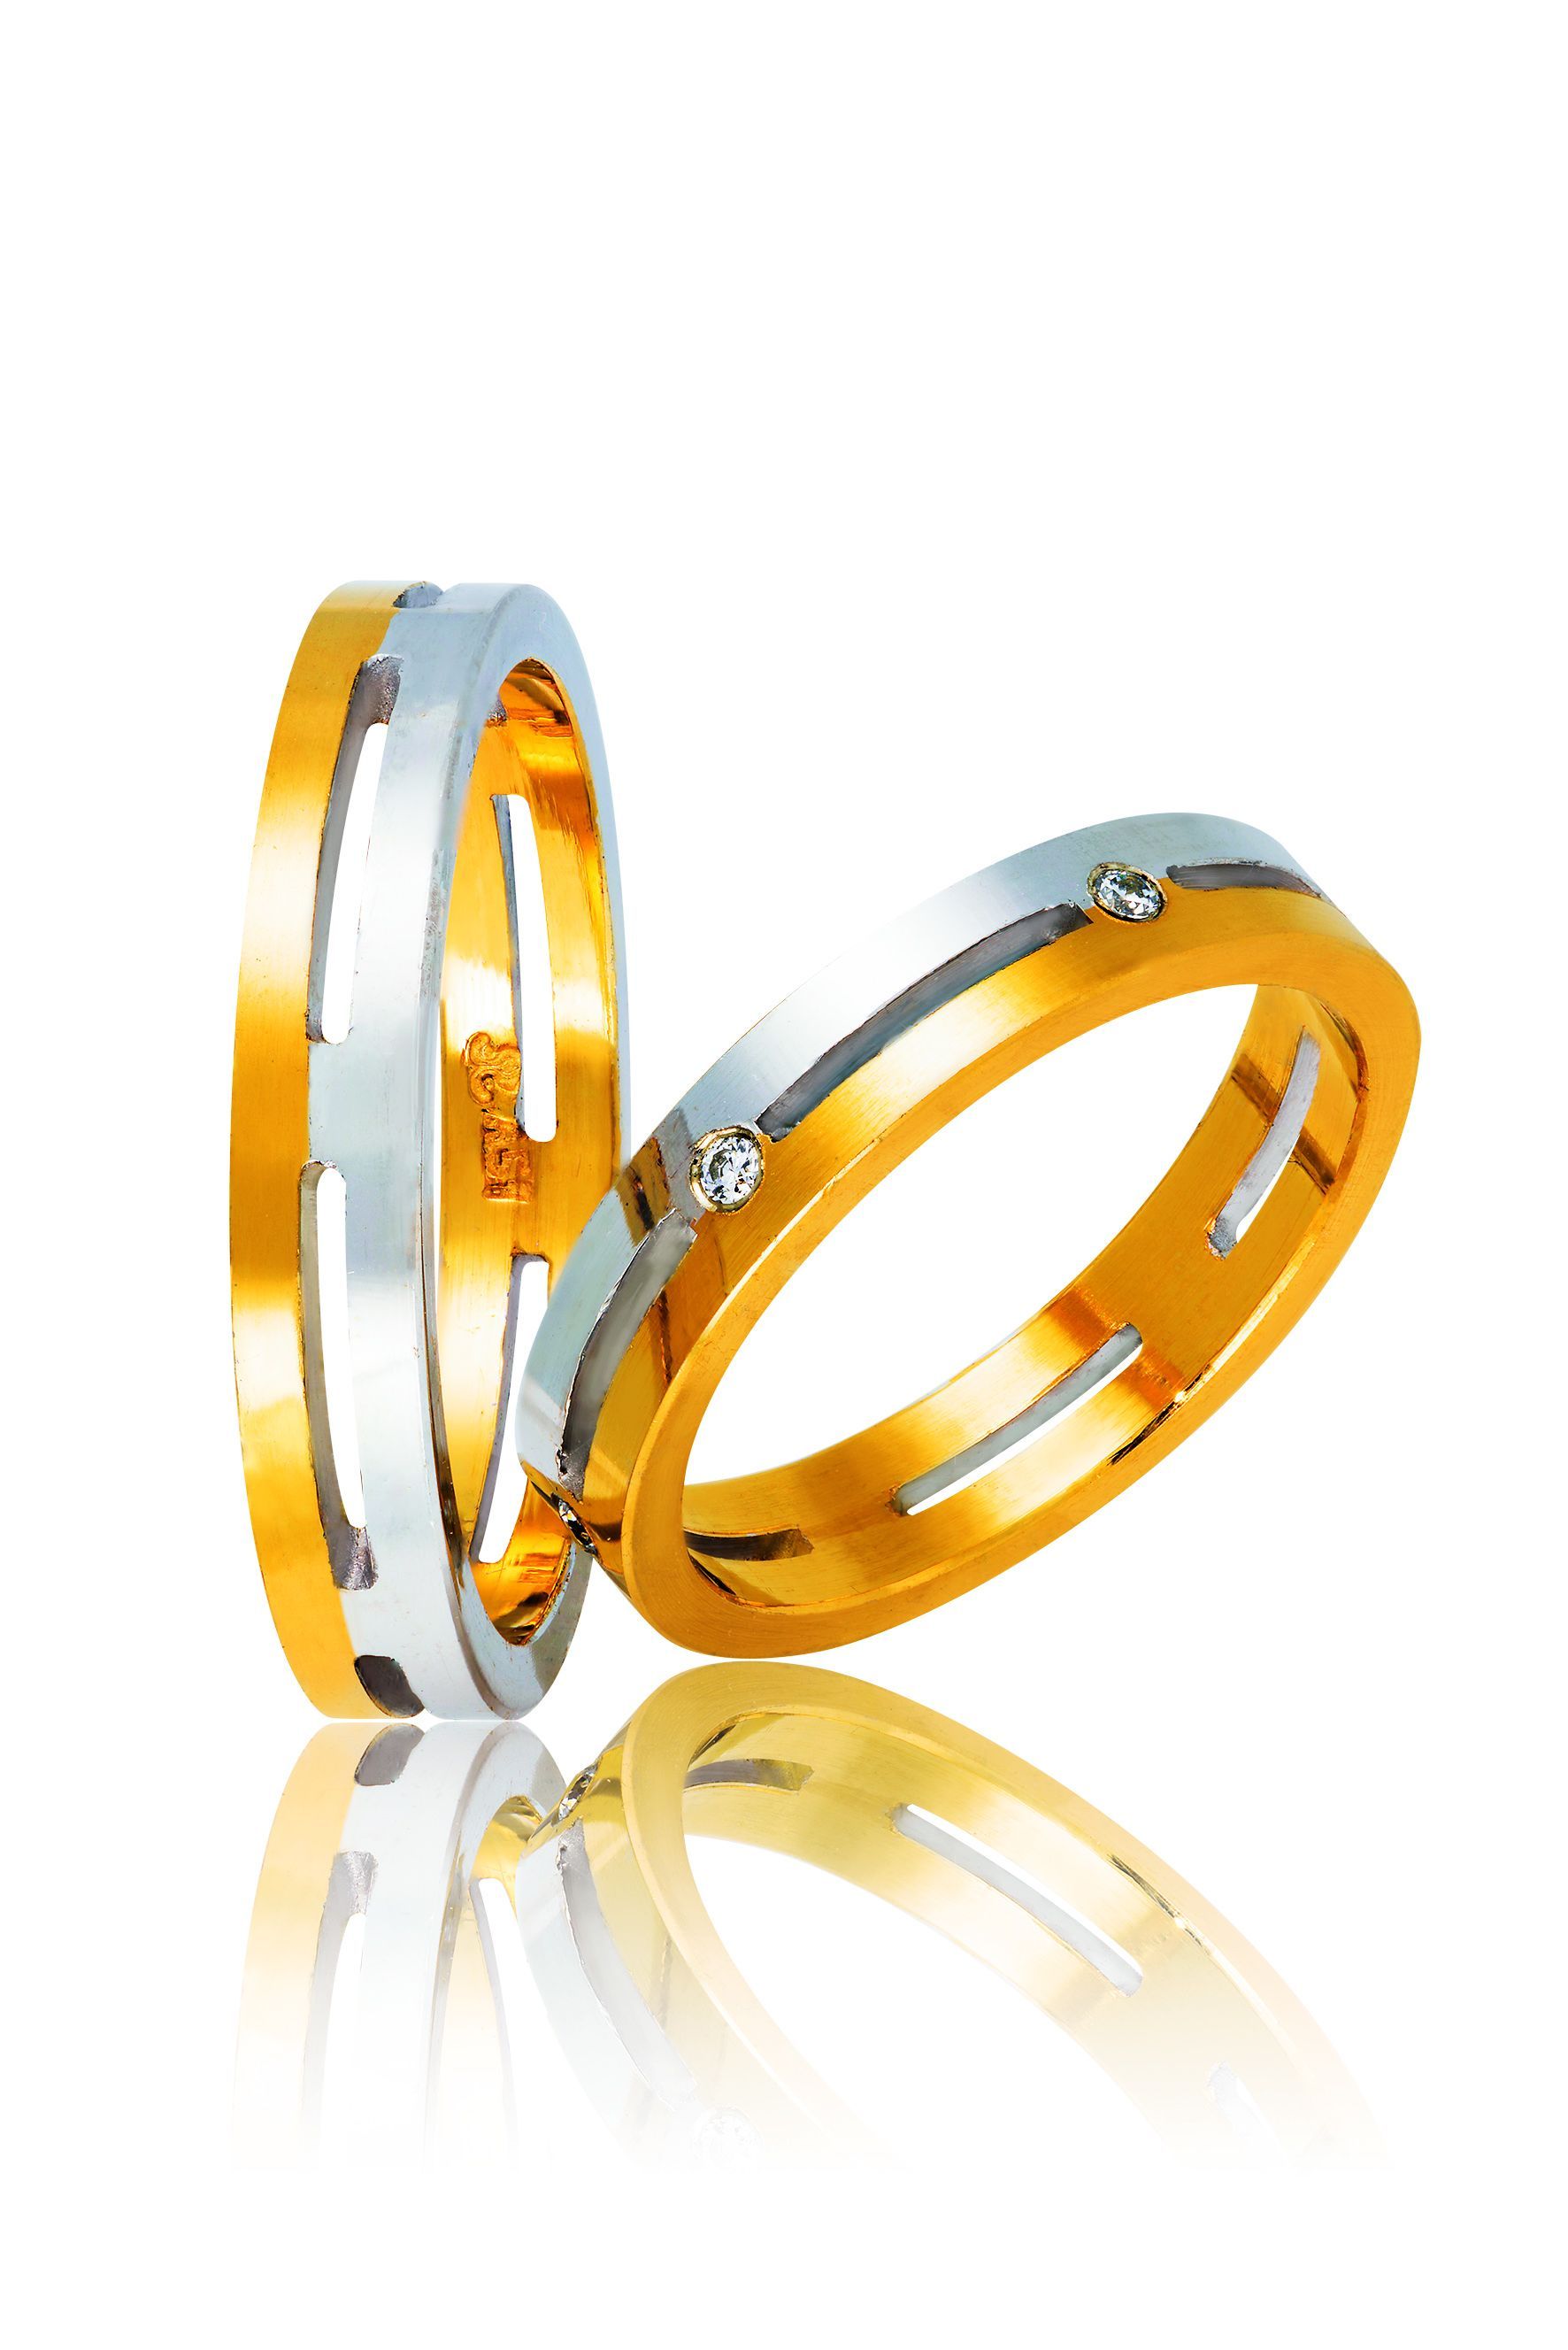 White gold & yellow gold wedding rings 4mm (code 5yw)